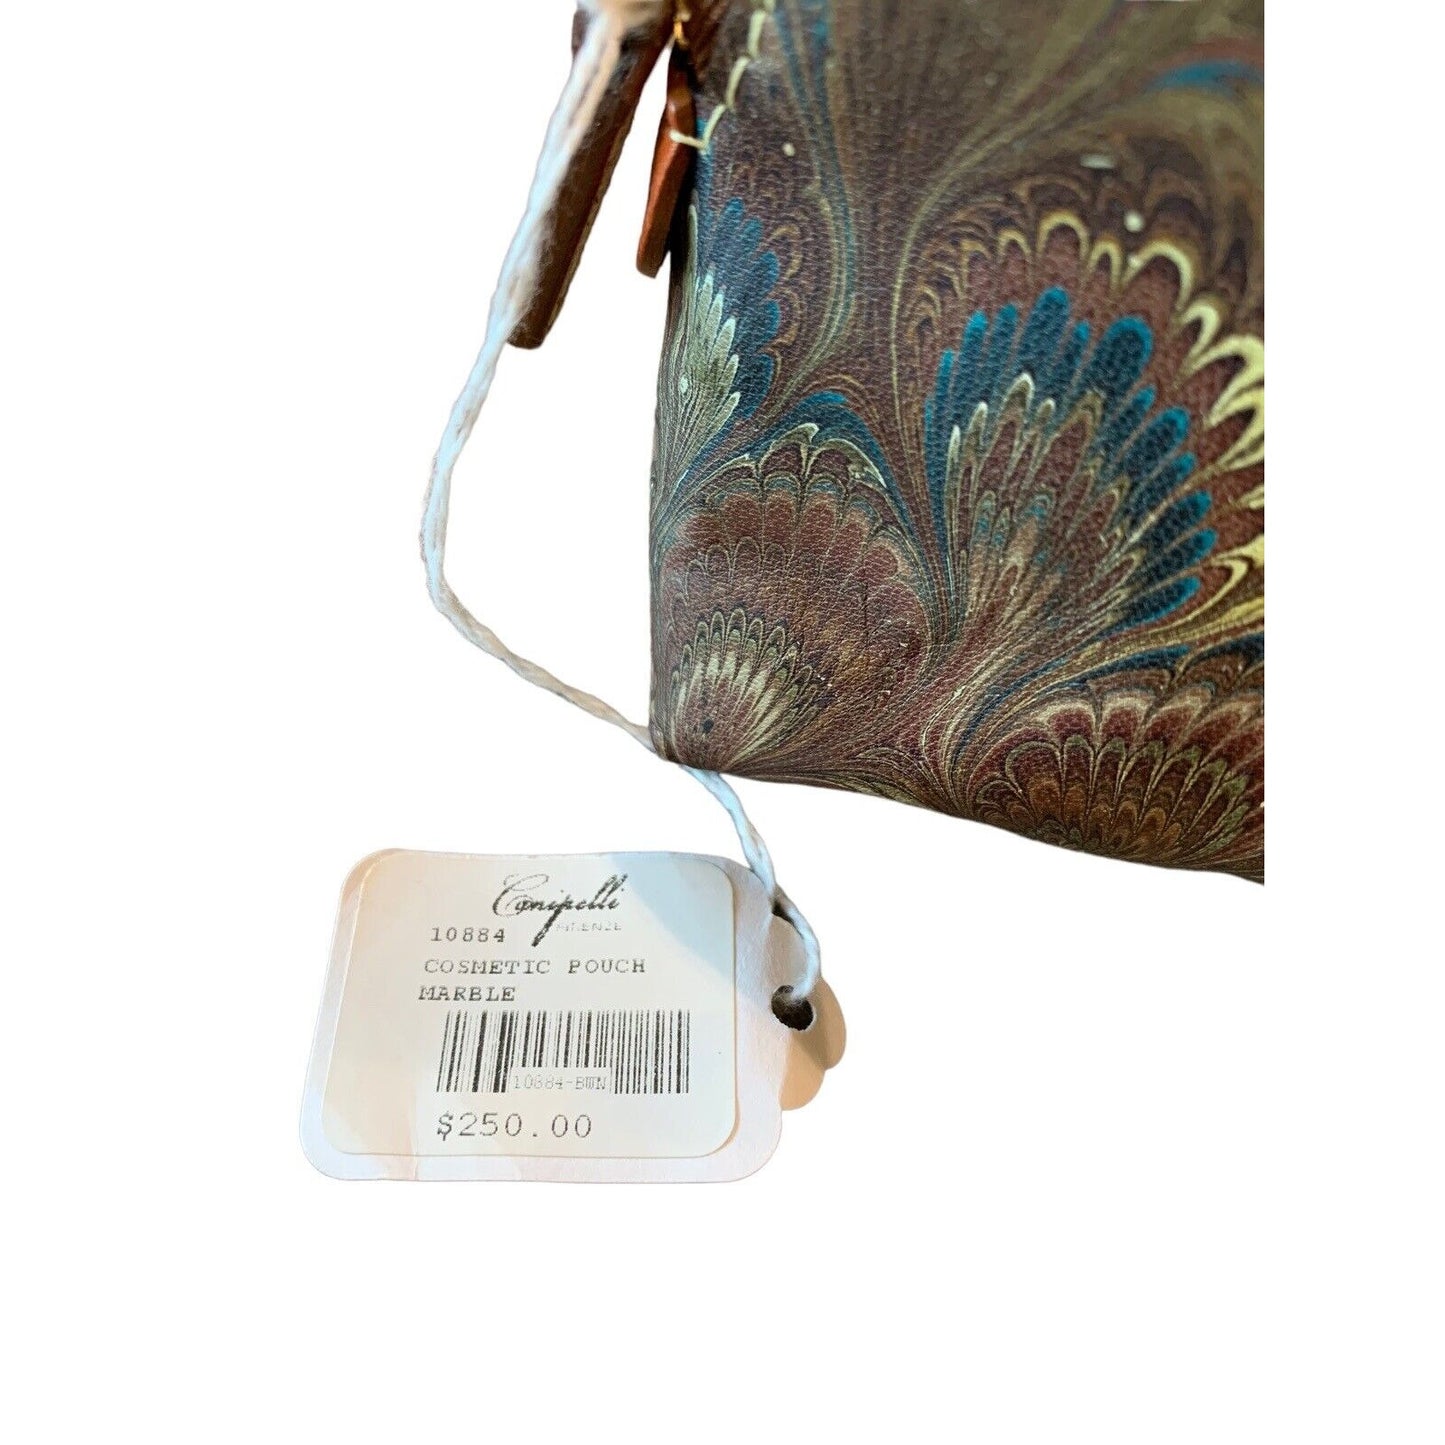 Cuoiofficine IL Papiro Marbleized Painted Canvas Make-up Bag